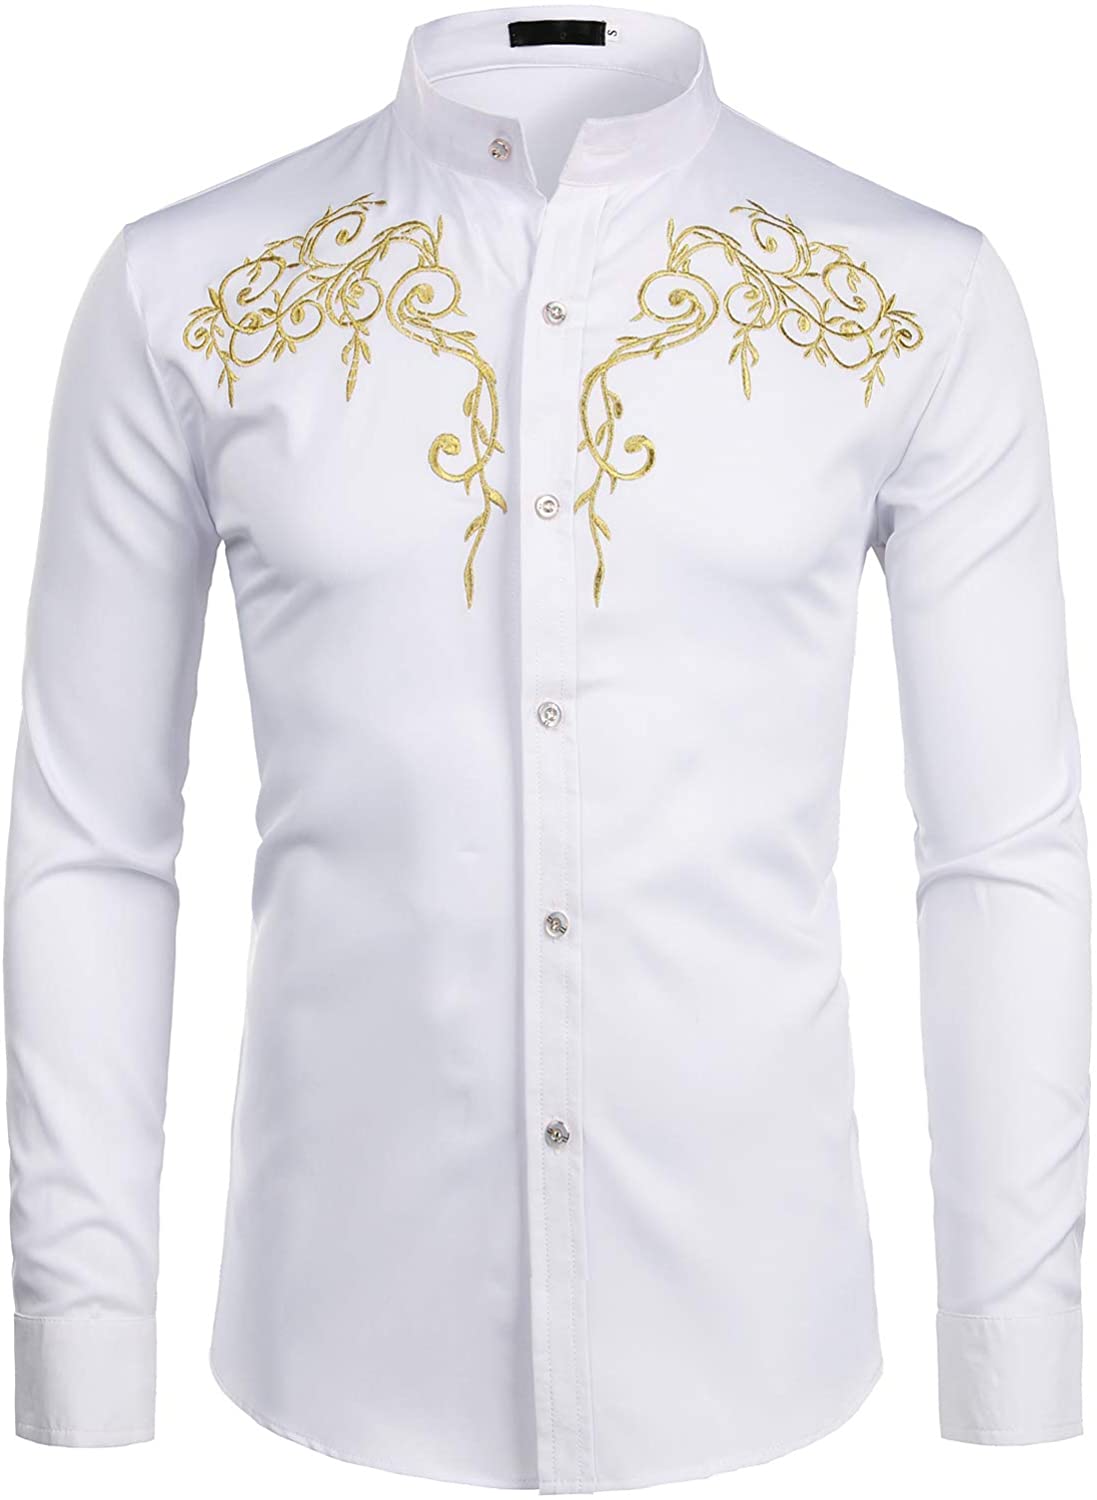 ZEROYAA Men's Floral Embroidery Slim Fit Long Sleeve Band Collar Dress ...